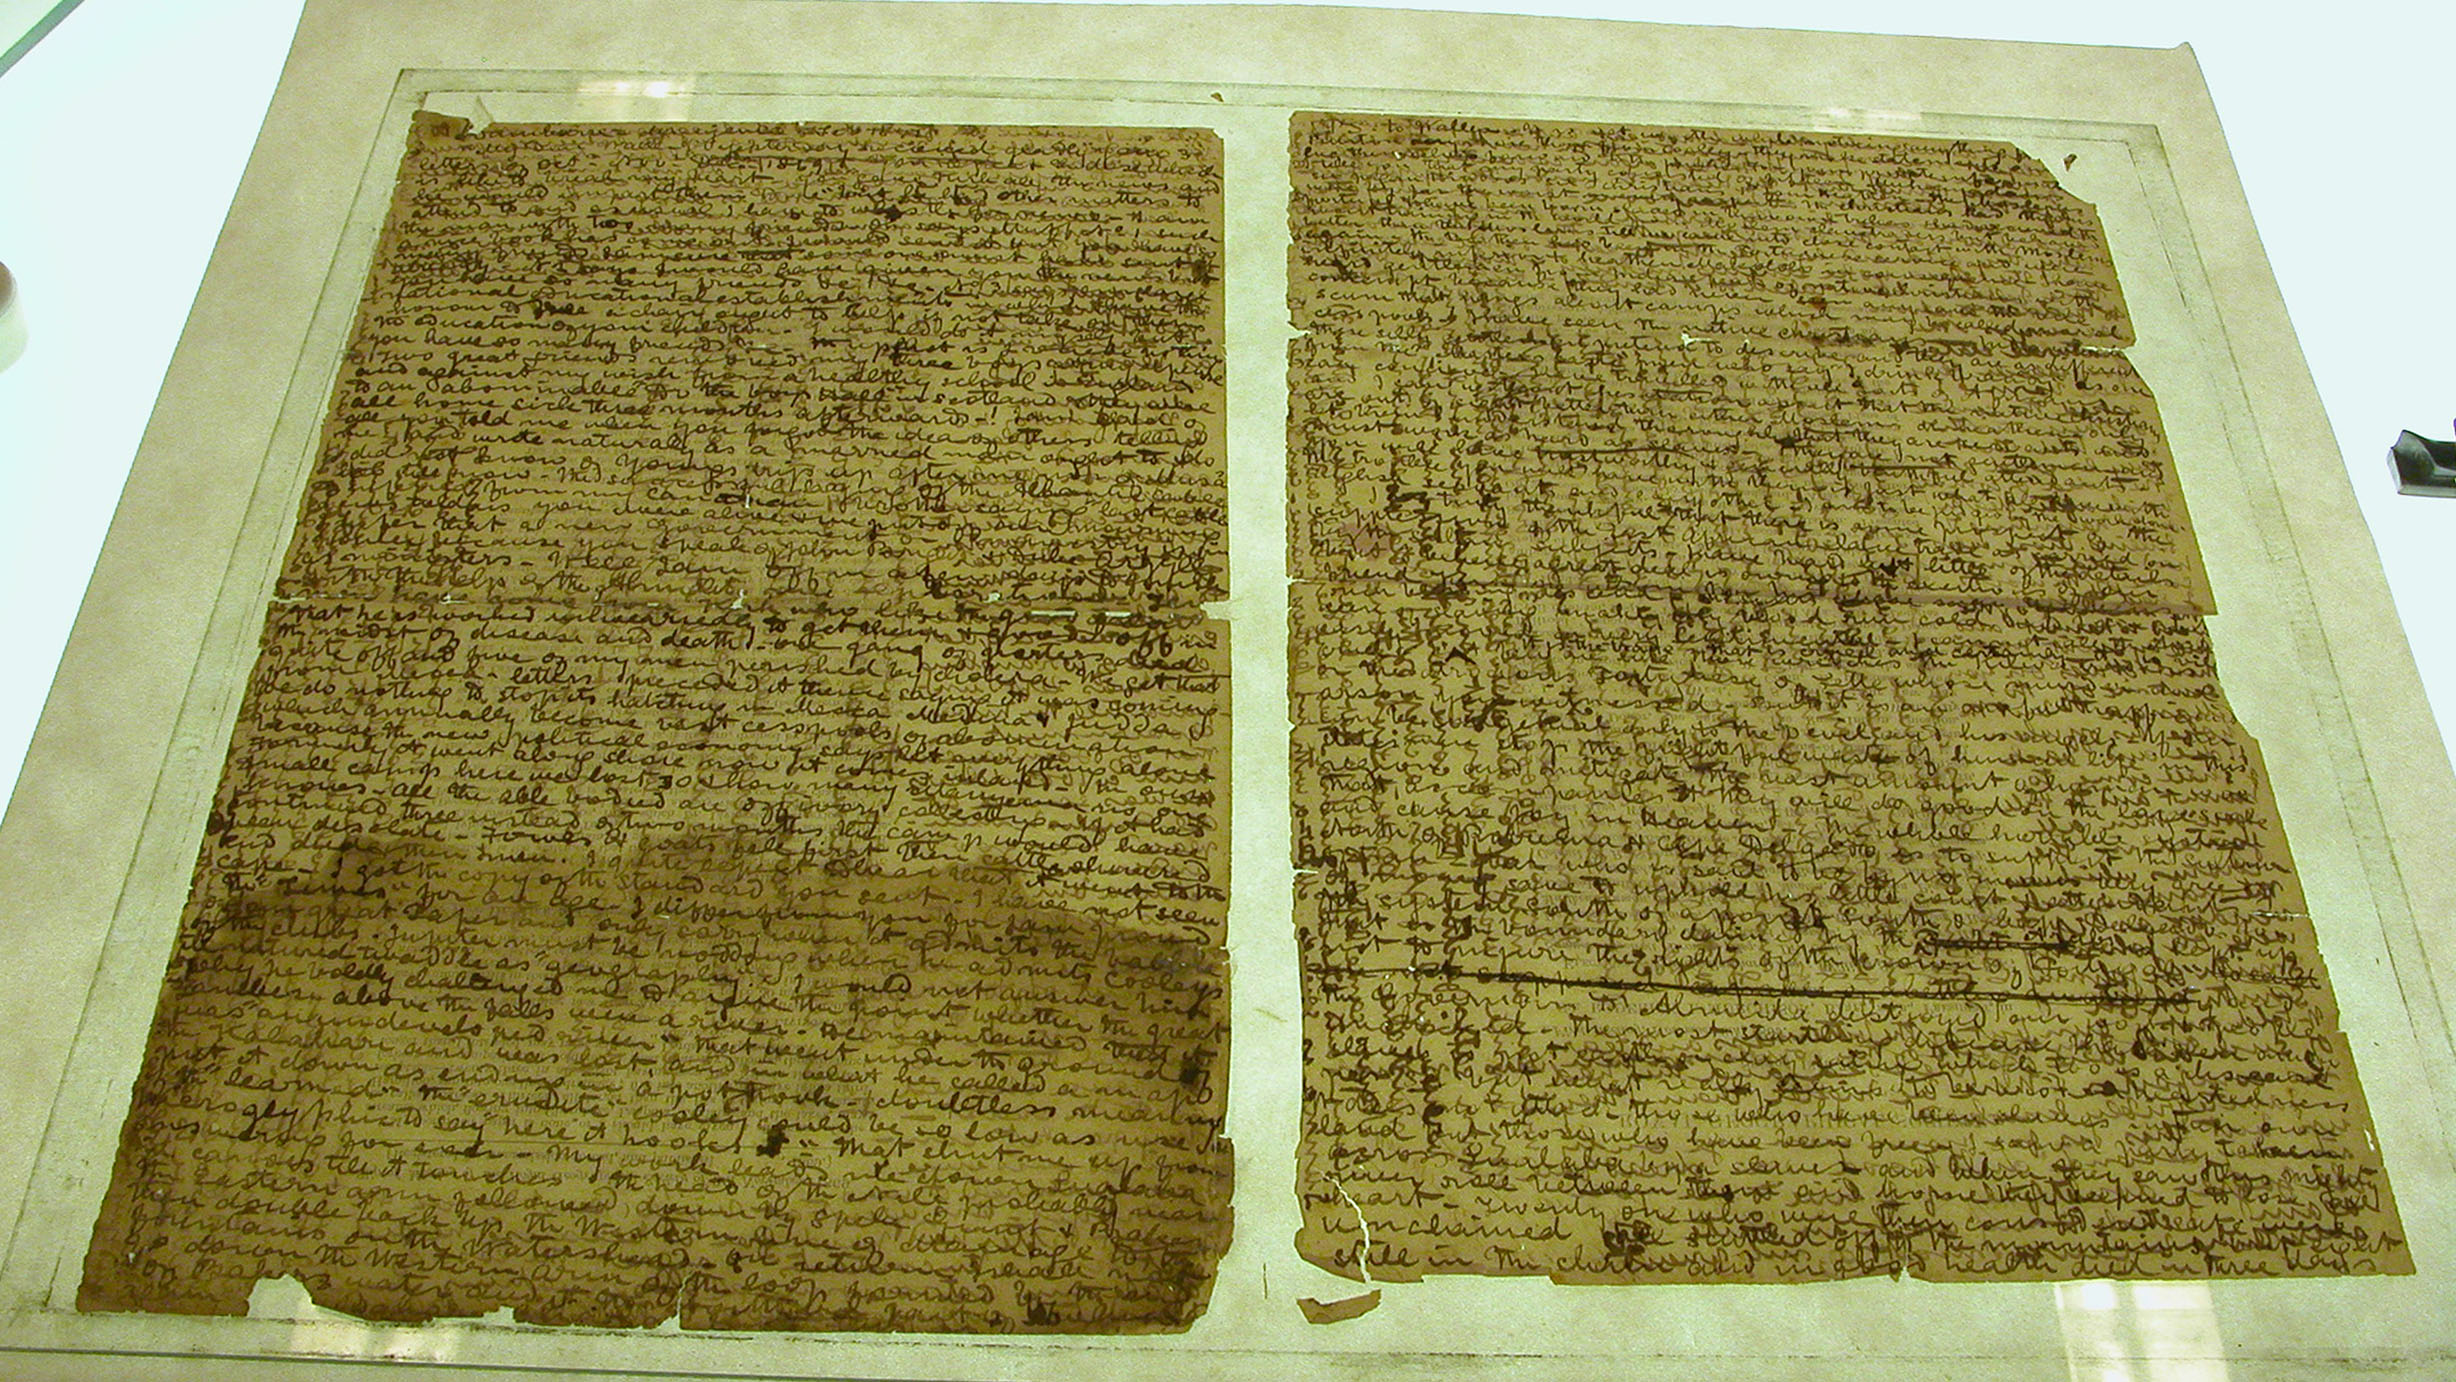 The two pages of the letter side by side prior to conservation. Copyright Adrian S. Wisnicki. Creative Commons Attribution-NonCommercial 3.0 Unported (https://creativecommons.org/licenses/by-nc/3.0/).